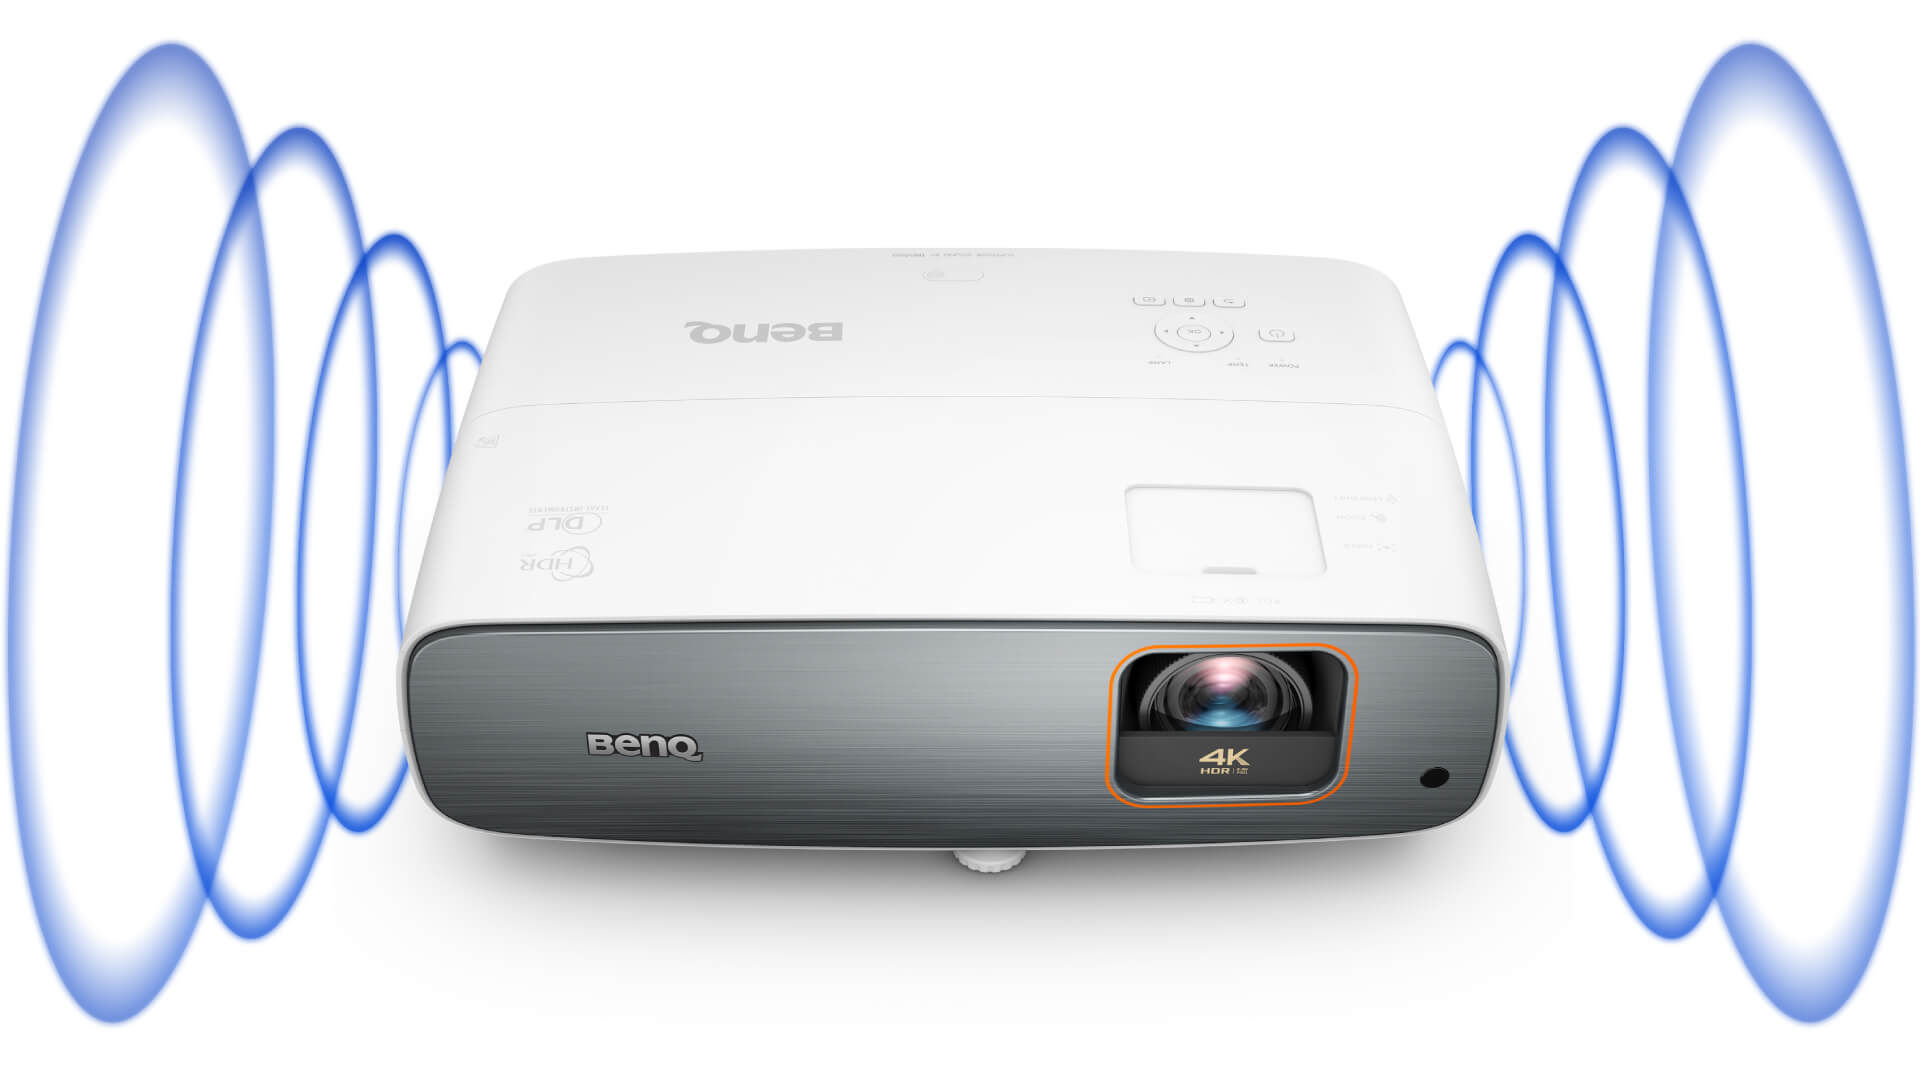 The TK860i 4K projector features treVolo 5Wx2 chambered speakers that bring Immersive Sound performance.